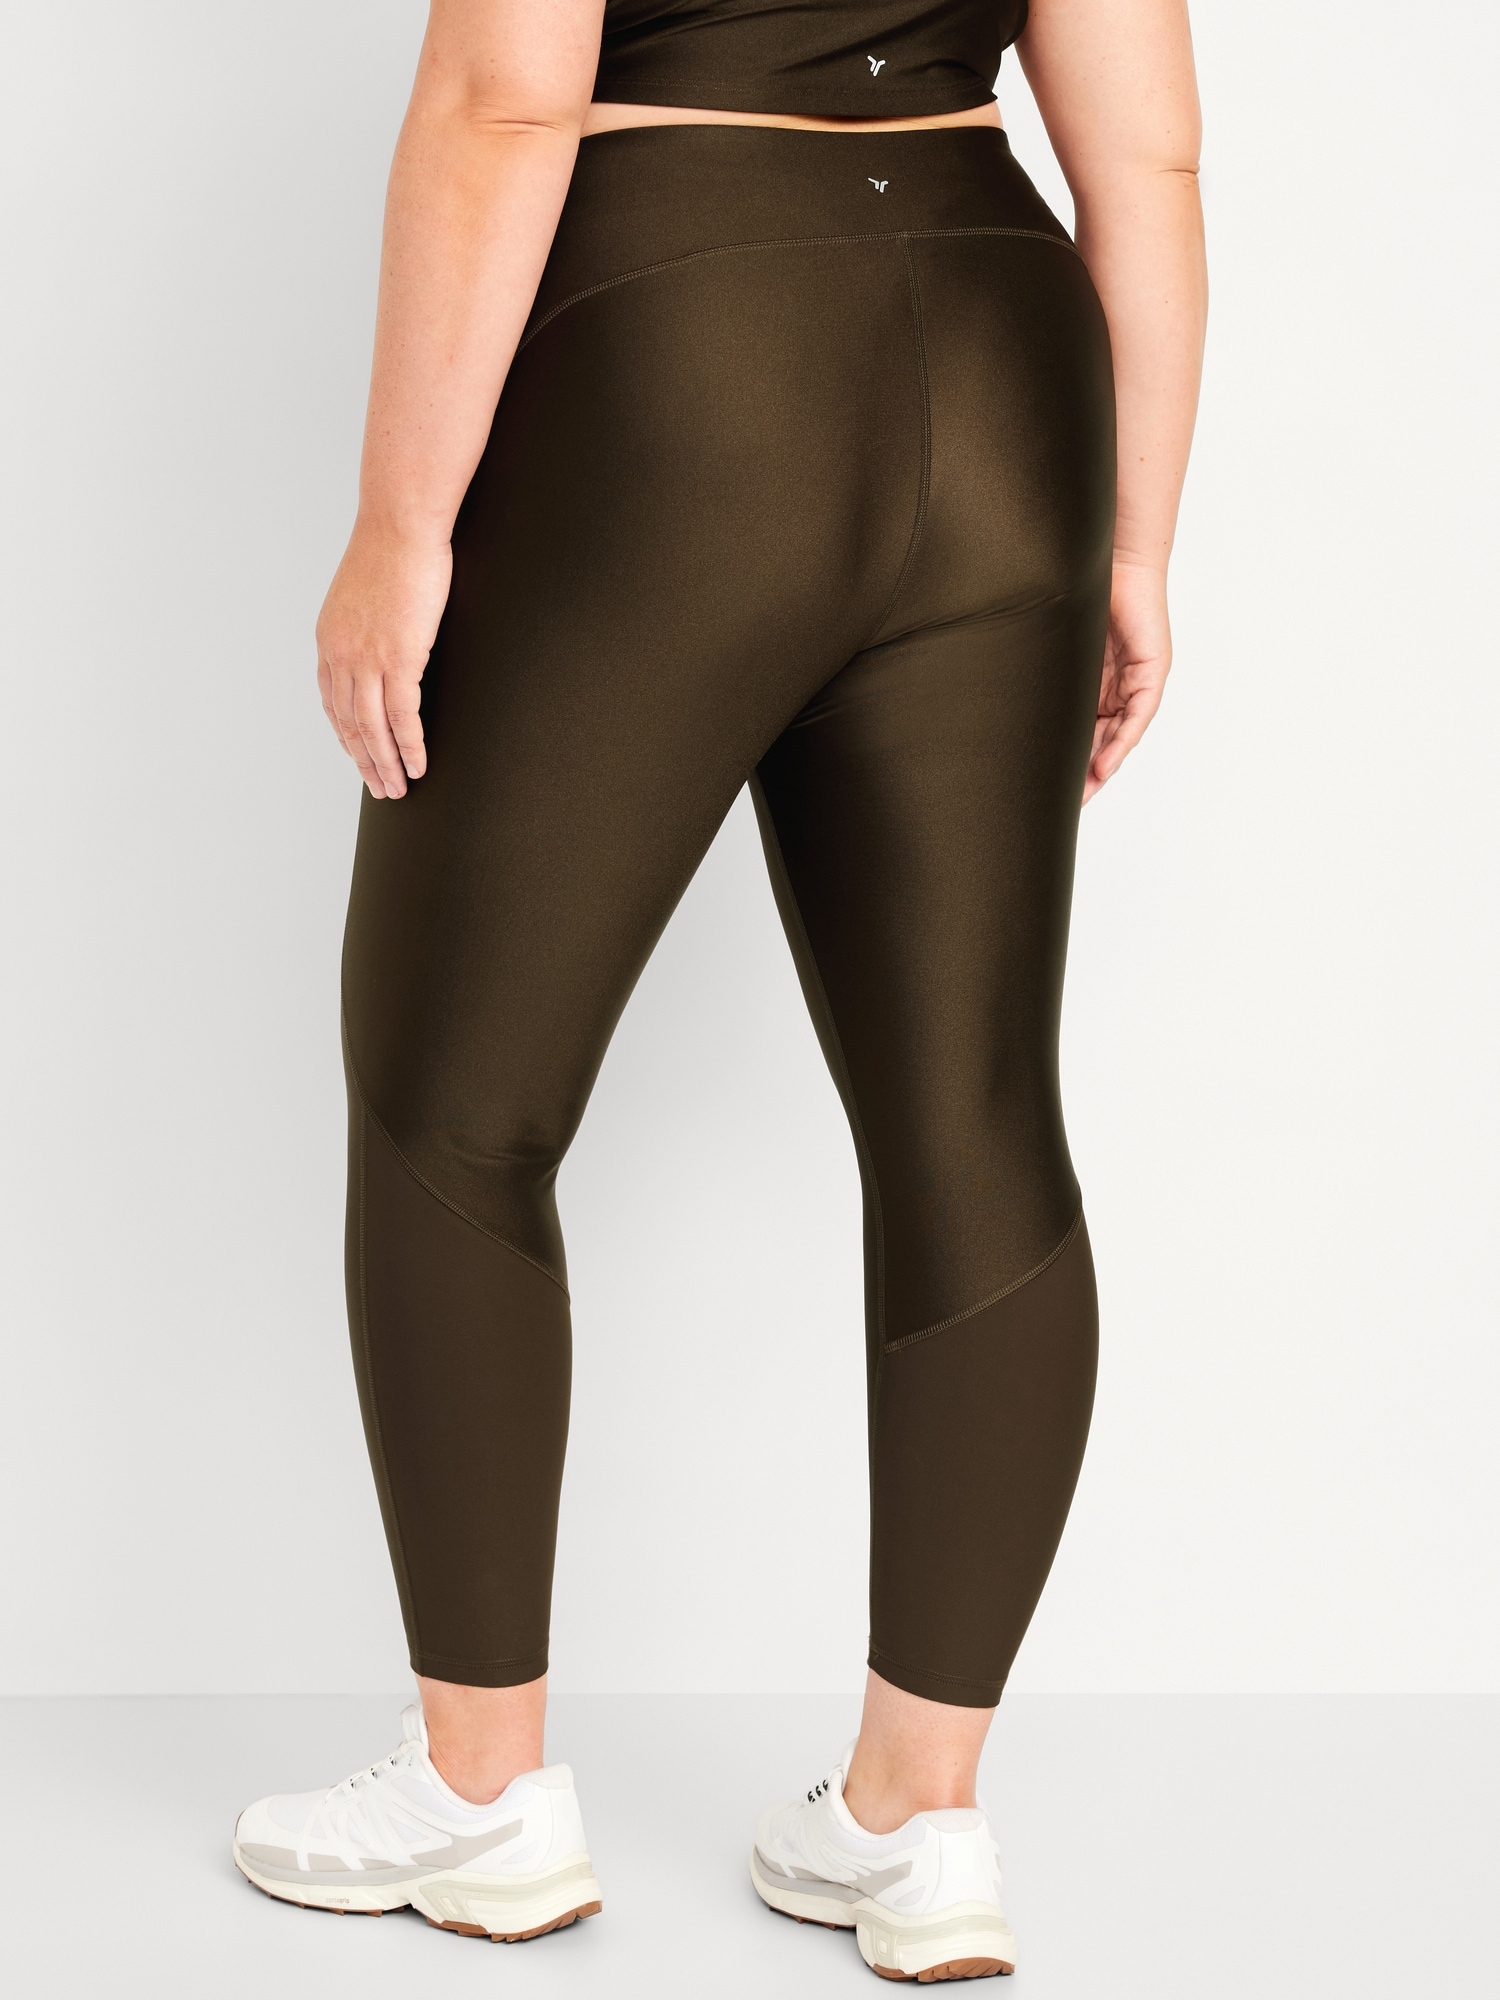 LegEnd Essential 7/8 Leggings High Waisted Yoga Pants - Move Freely with  Buttery Softness and Streamlined Contours, Black/Blue Gray, Small : :  Clothing, Shoes & Accessories